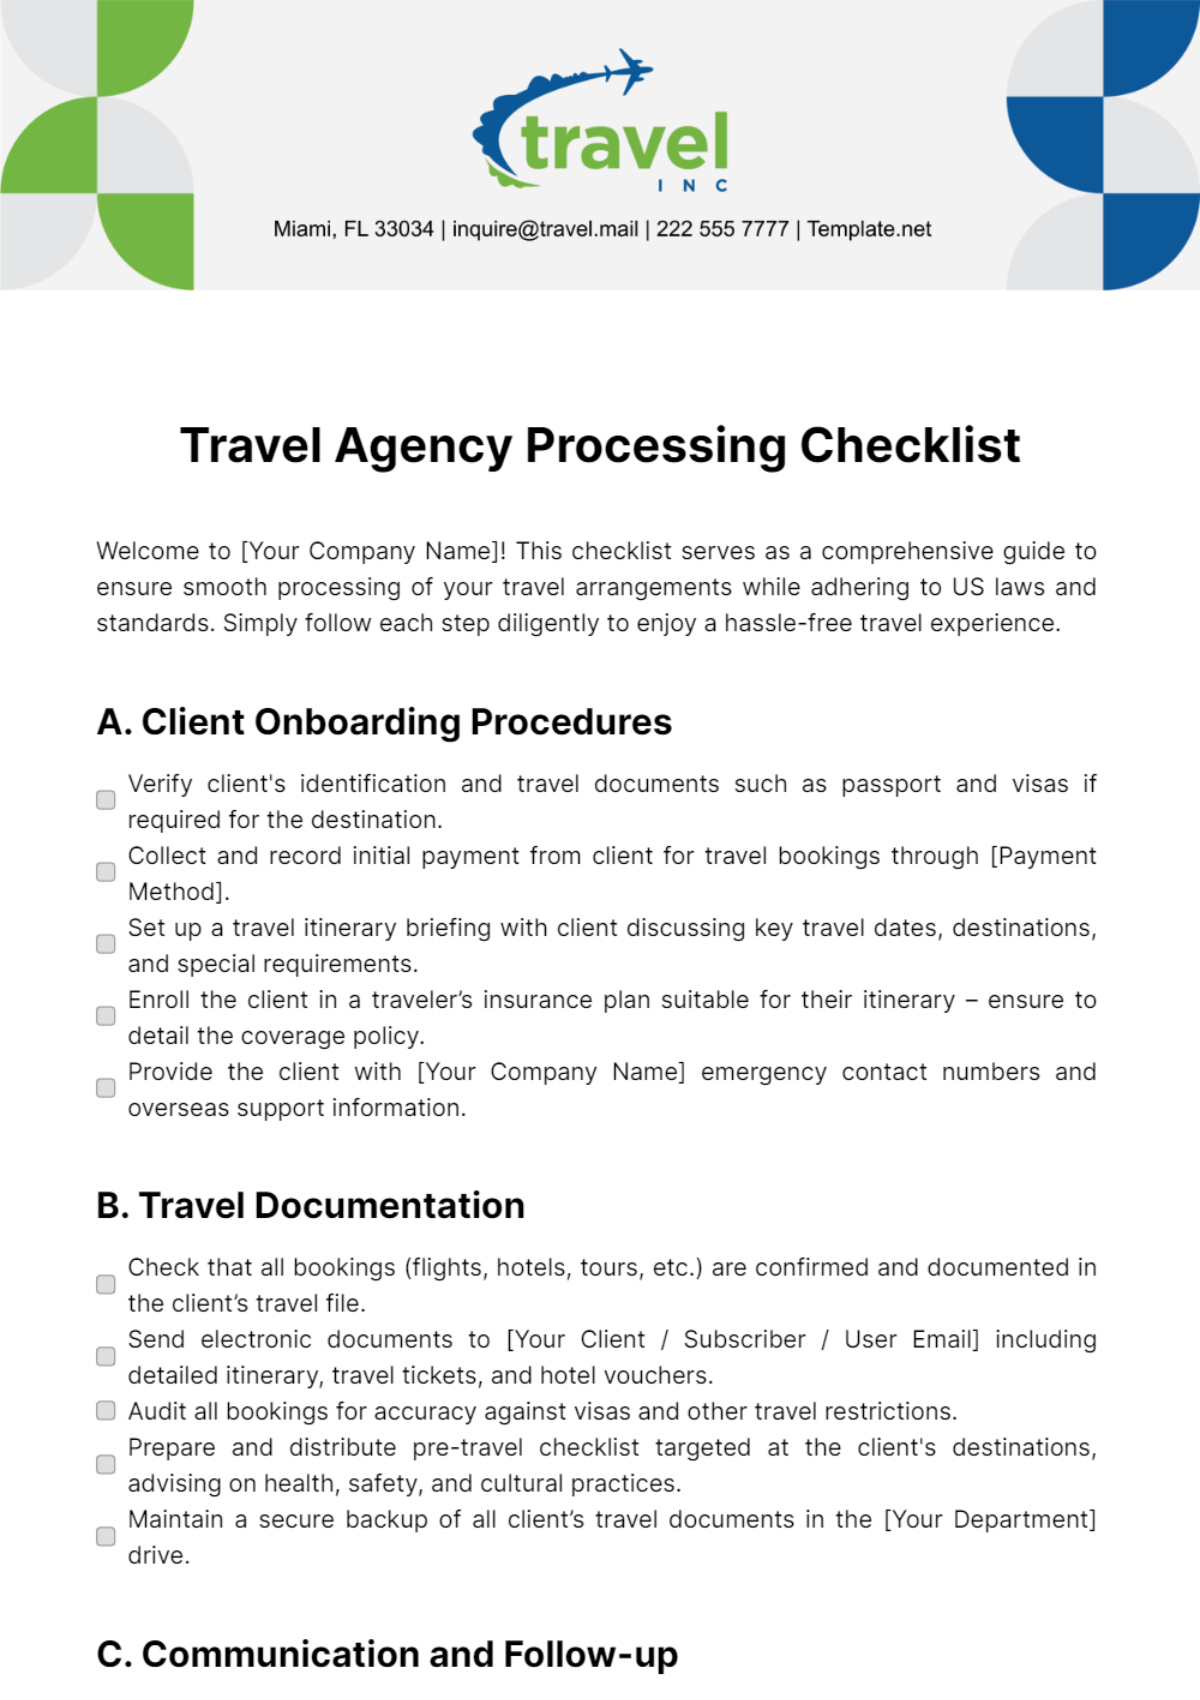 Travel Agency Processing Checklist Template